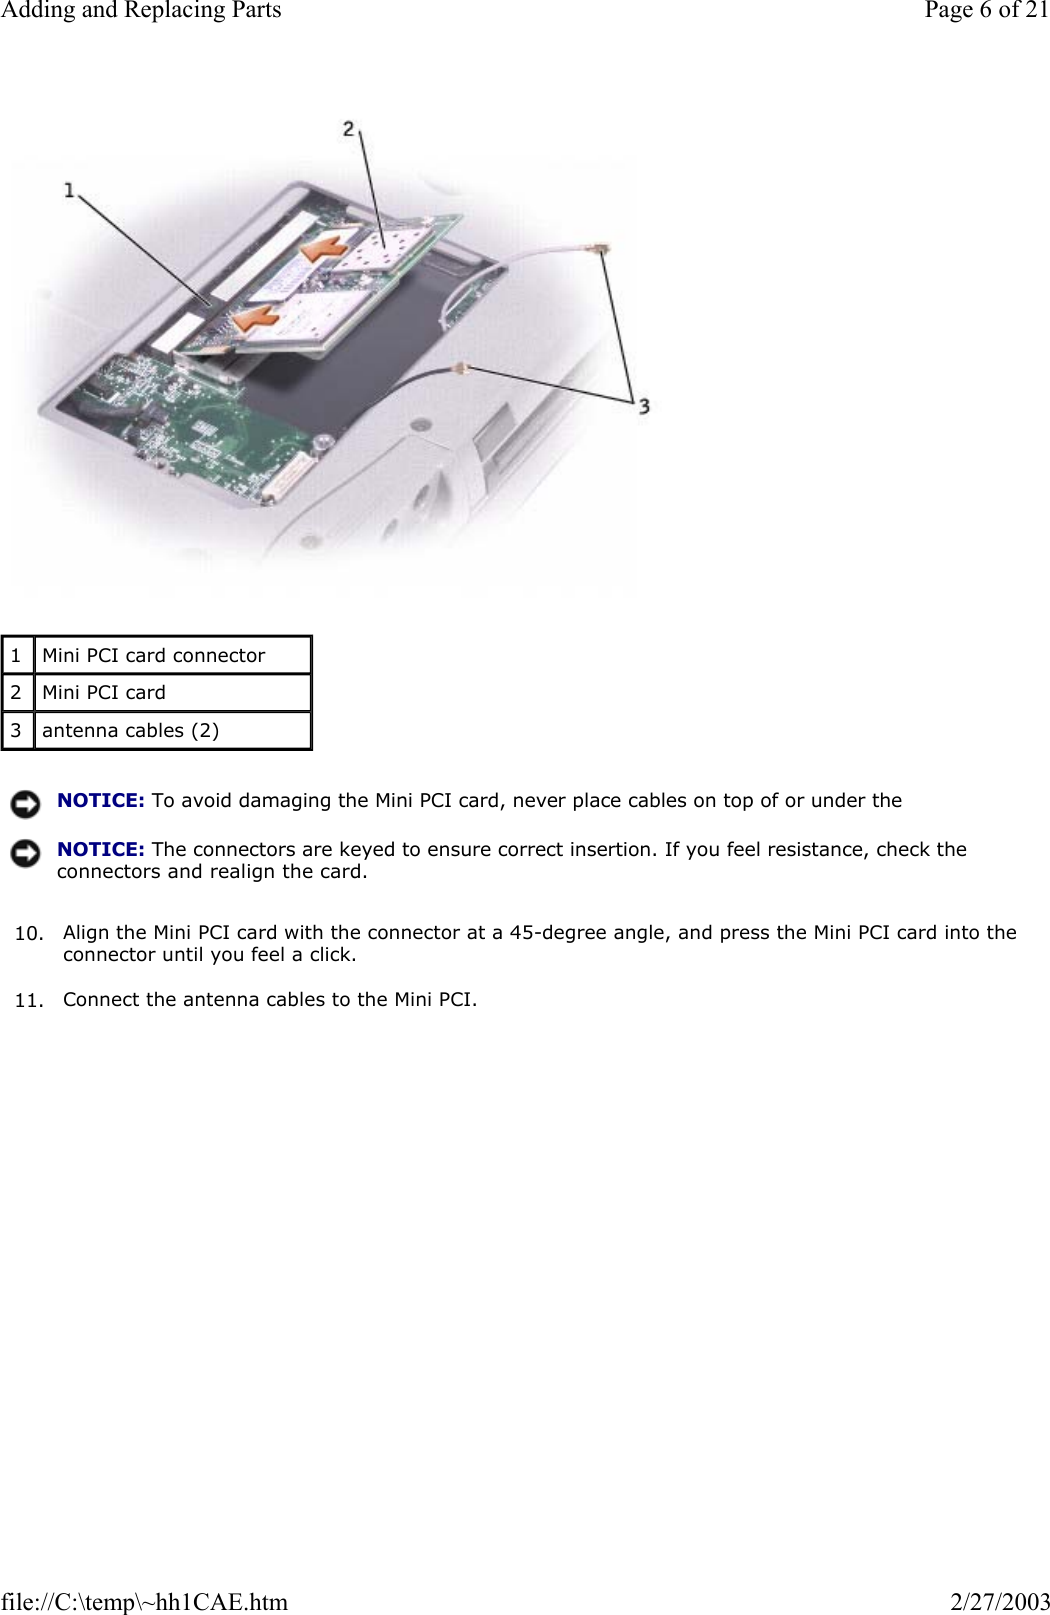   10. Align the Mini PCI card with the connector at a 45-degree angle, and press the Mini PCI card into the connector until you feel a click.  11. Connect the antenna cables to the Mini PCI.  1  Mini PCI card connector 2  Mini PCI card 3  antenna cables (2) NOTICE: To avoid damaging the Mini PCI card, never place cables on top of or under the NOTICE: The connectors are keyed to ensure correct insertion. If you feel resistance, check the connectors and realign the card.Page 6 of 21Adding and Replacing Parts2/27/2003file://C:\temp\~hh1CAE.htm